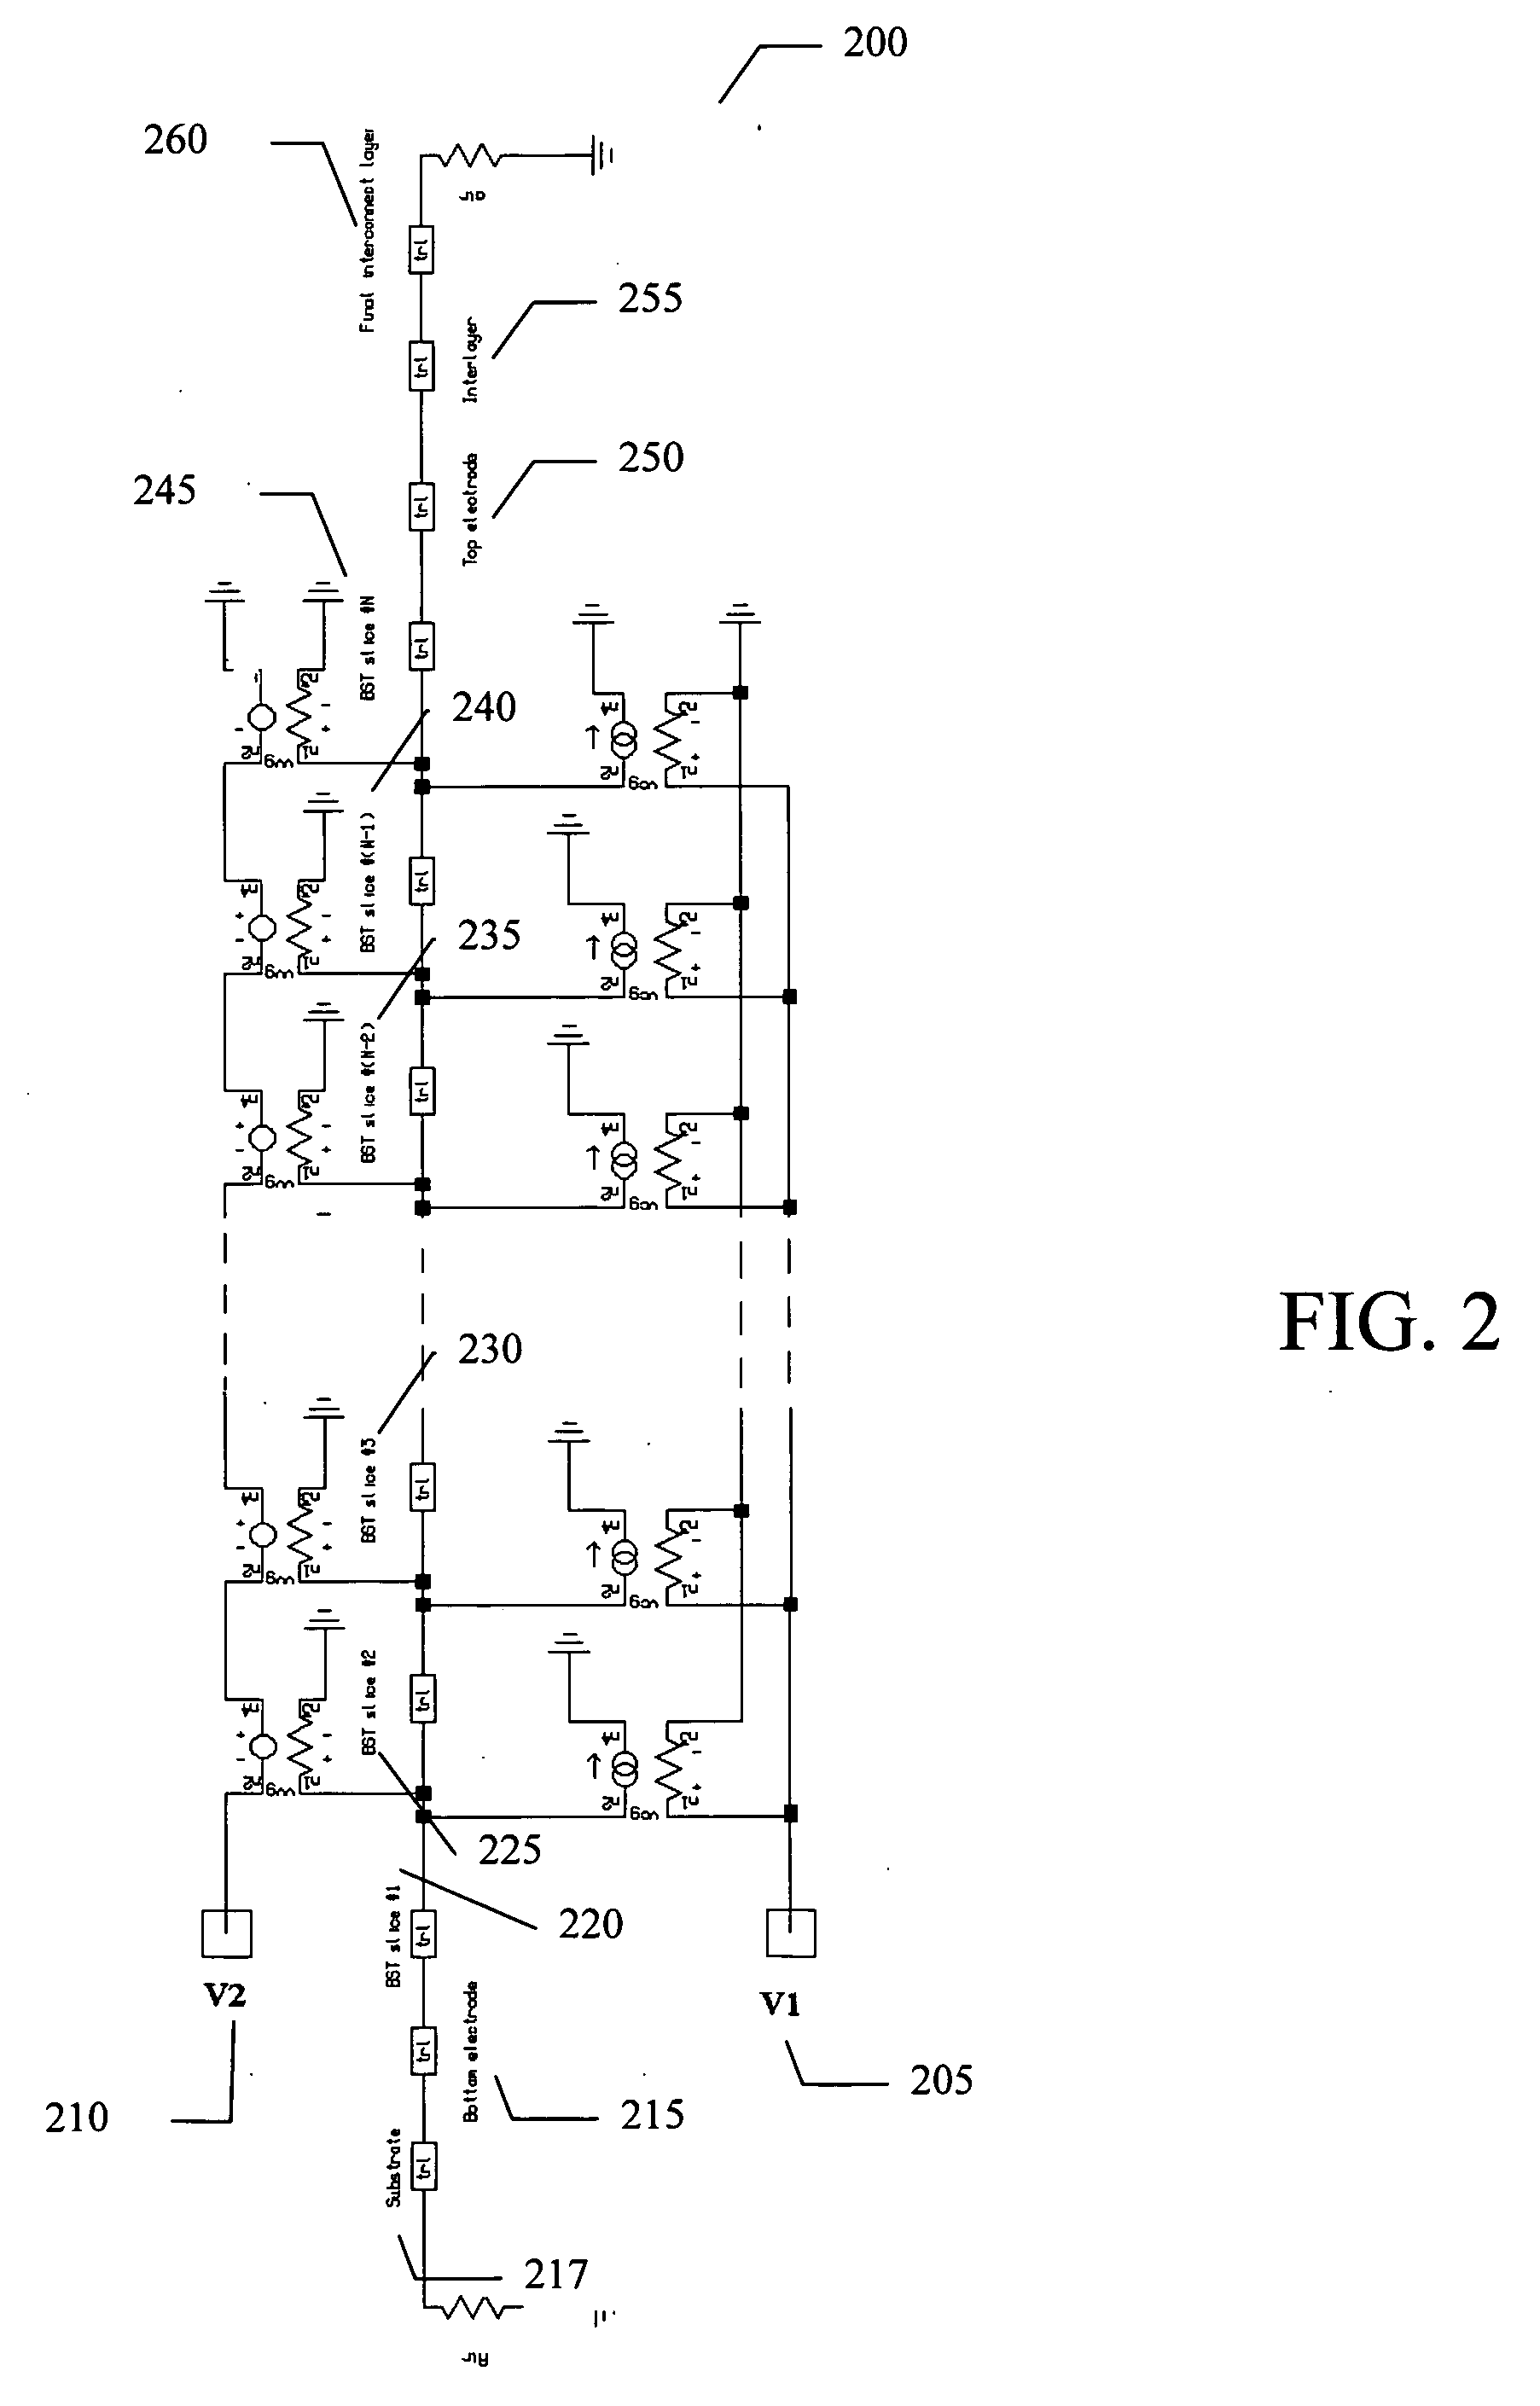 Apparatus and method capable of a high fundamental acoustic resonance frequency and a wide resonance-free frequency range